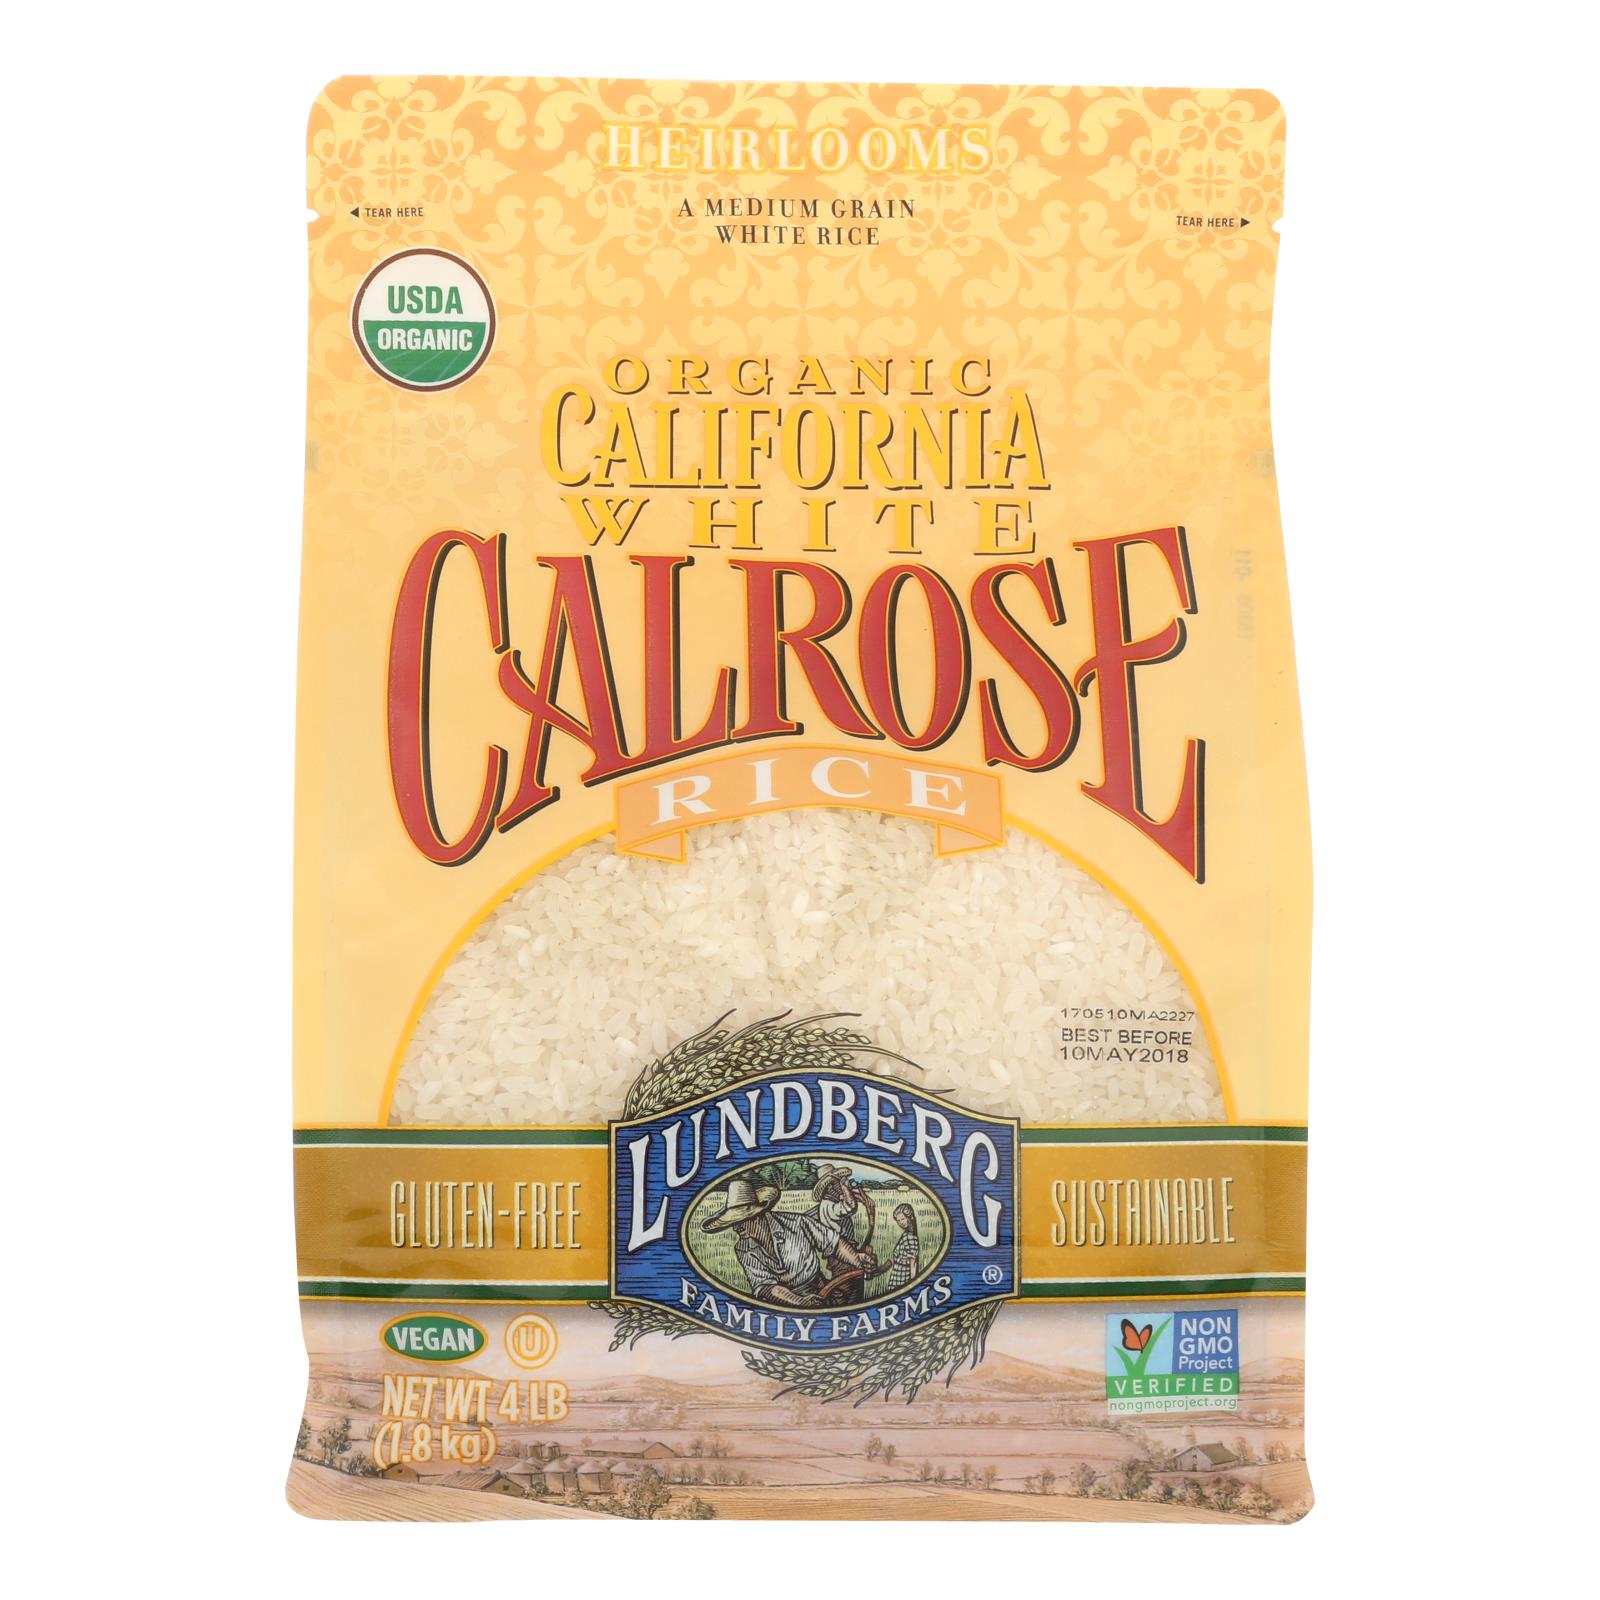 Lundberg Family Farms Organic White Calrose Rice Part Of Our Heirlooms Collection - 6개 묶음상품 - 4 LB